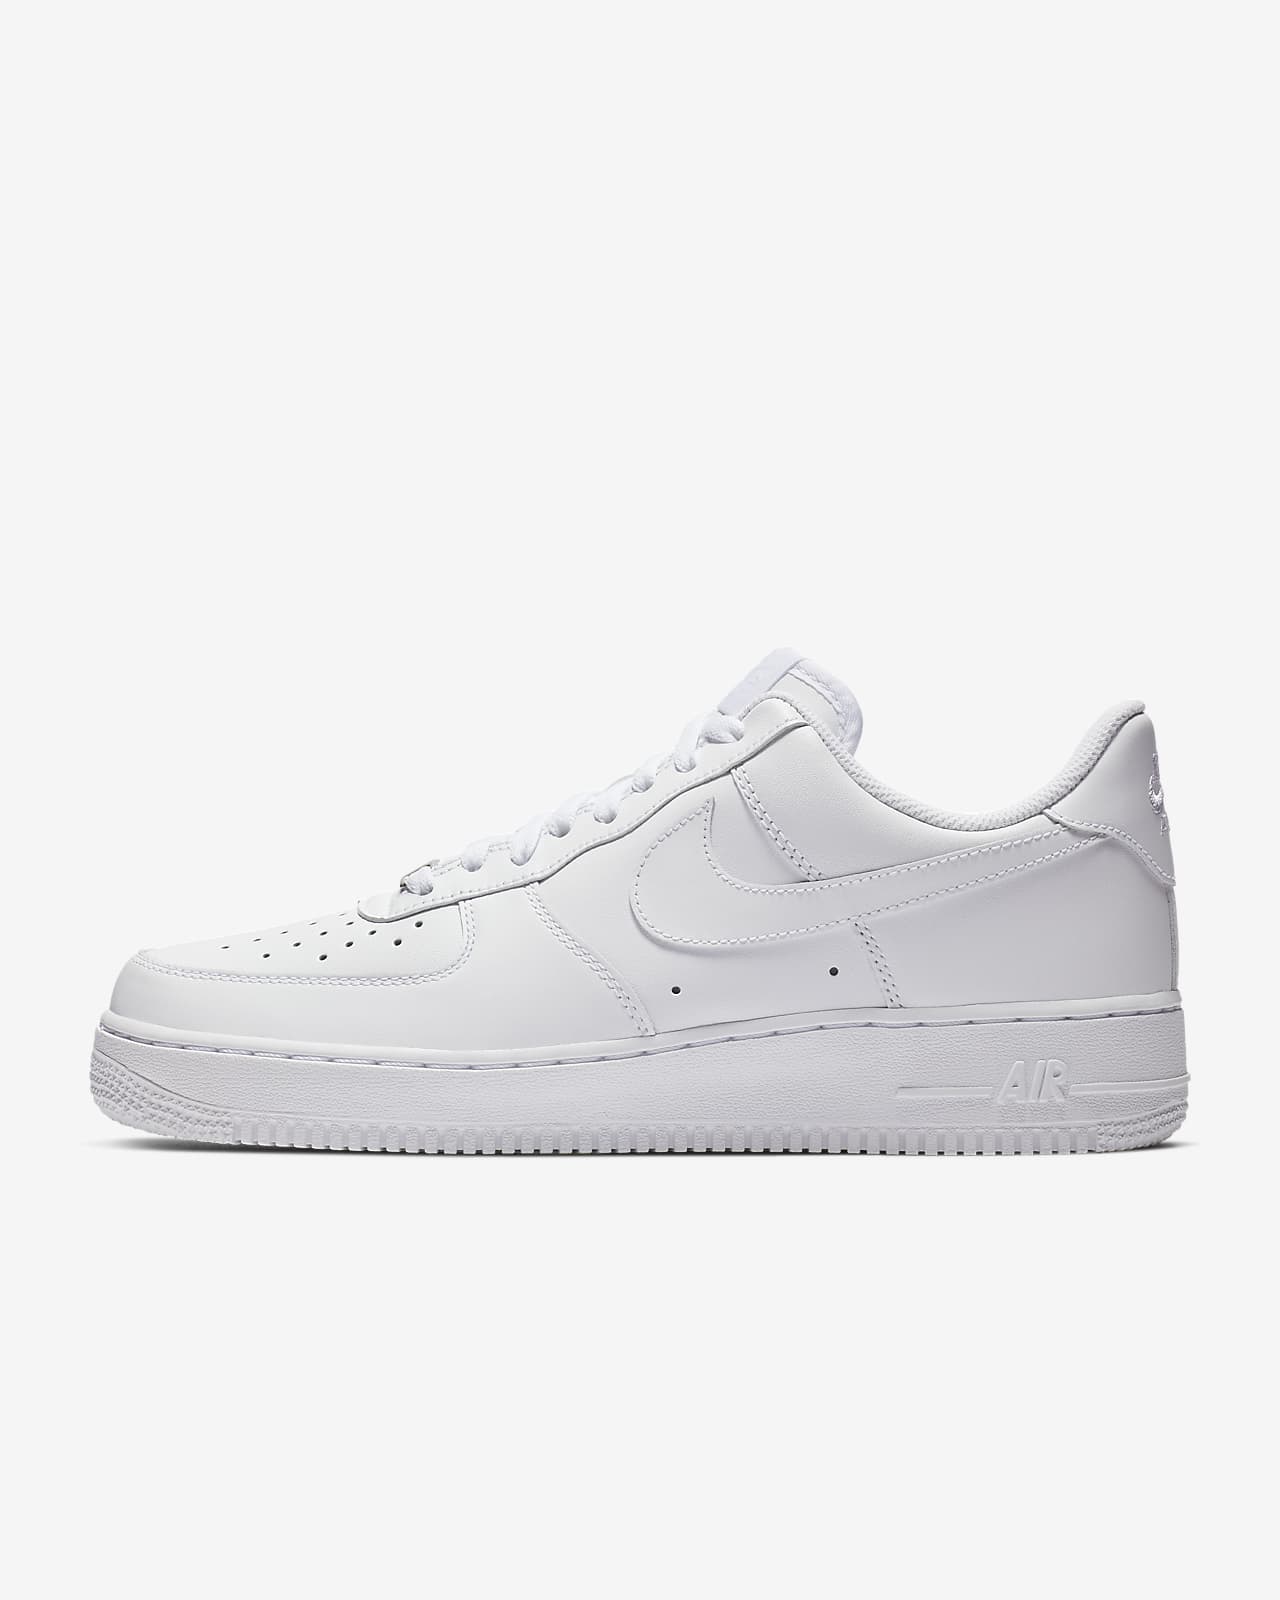 womans air force 1s